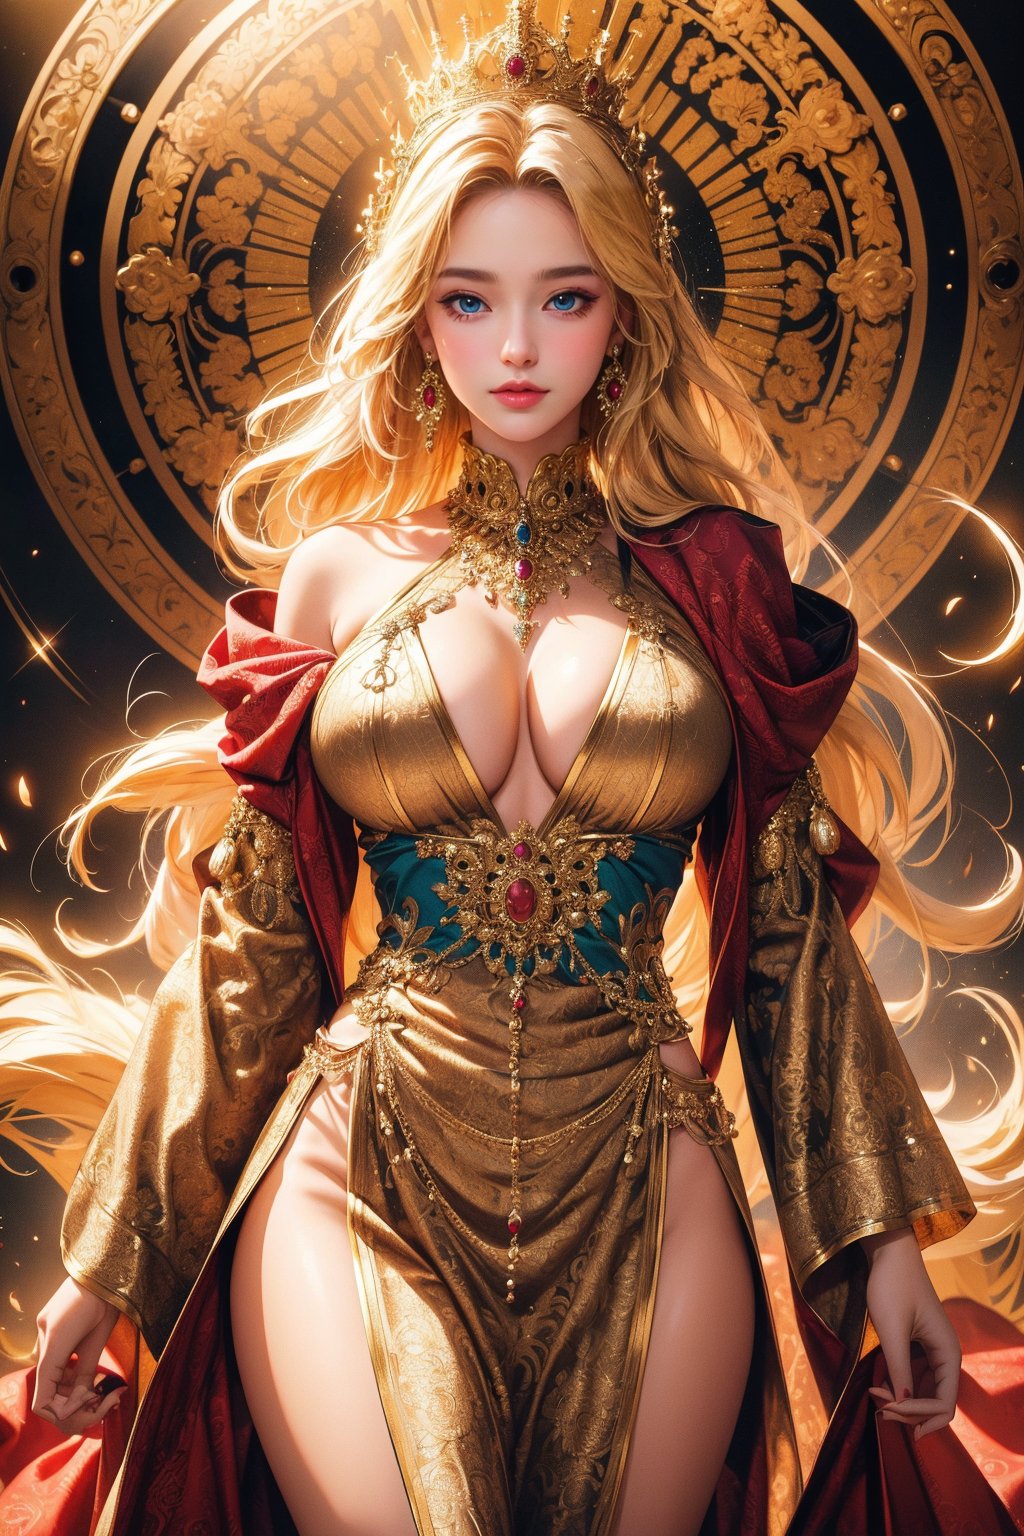 busty and sexy girl, 8k, masterpiece, ultra-realistic, best quality, high resolution, high definition,dressed in an elaborate, ornate costume, CROWN, JEWELRY,blonde,majestic aura,The costume is richly detailed with gold and dark tones,The background features decorative circular patterns that radiate outward,There is a glow around the figure, which gives an ethereal feel to the image